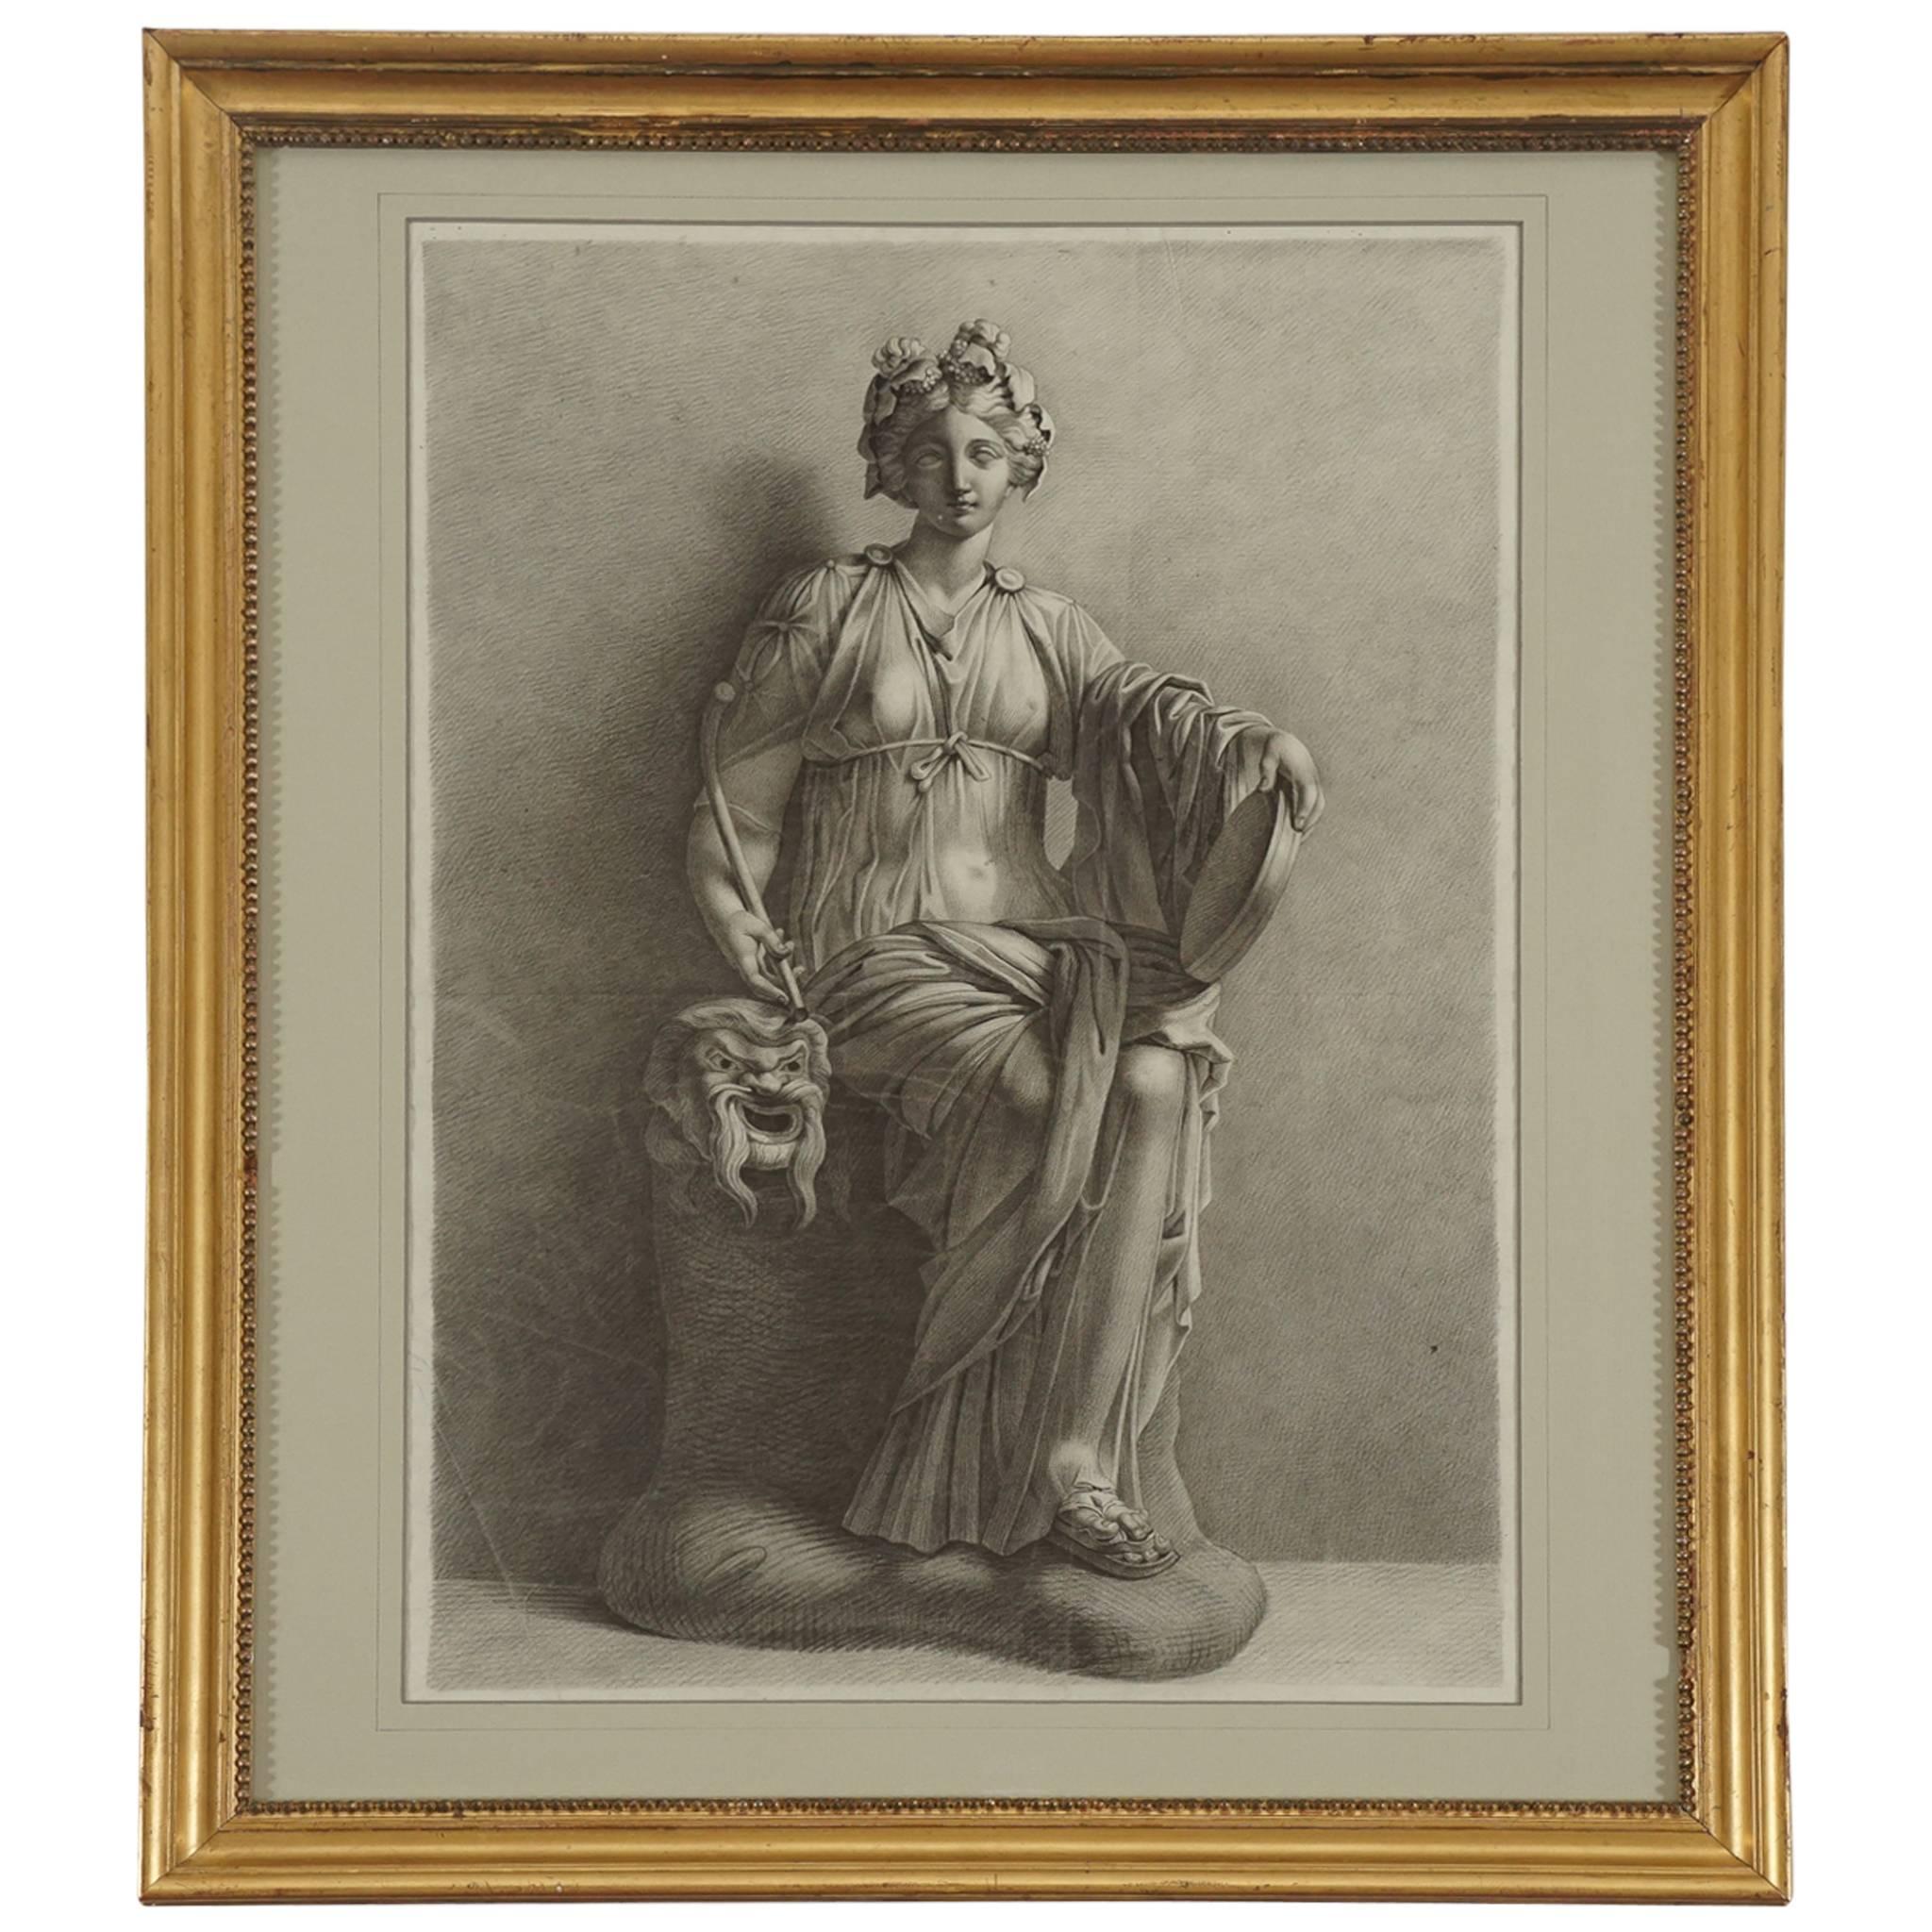 An Early 19th-century Charcoal on Paper Drawing of the Muse Thalia